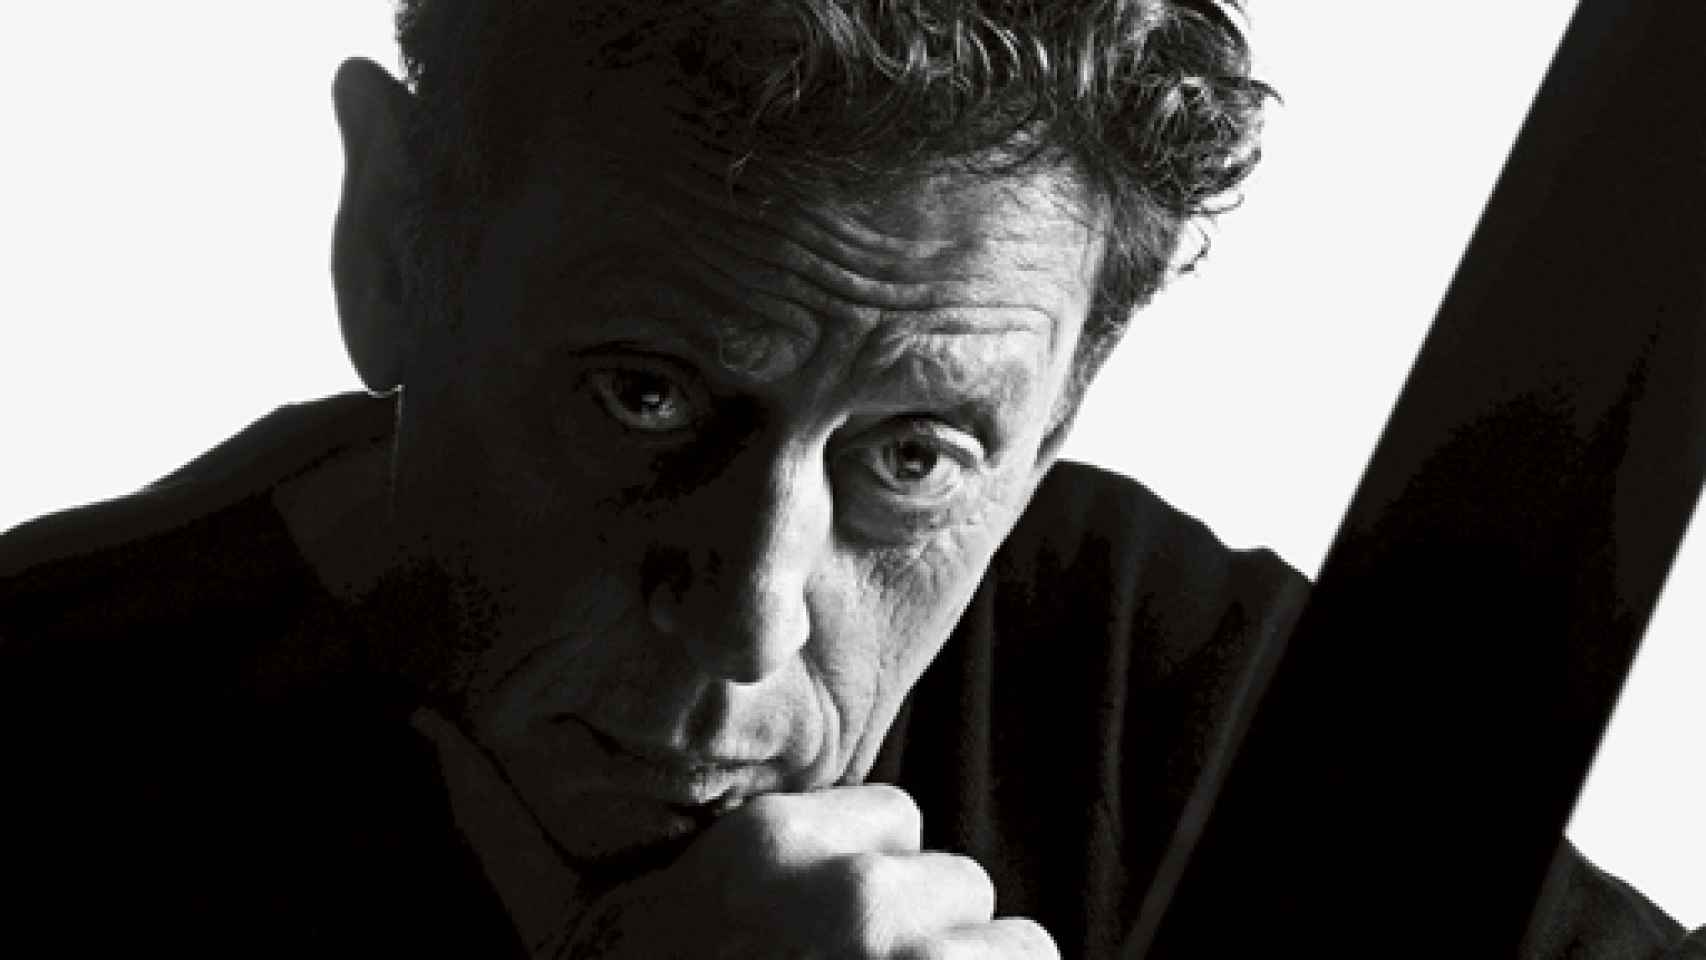 Image: Philip Glass, amable y nada repetitivo